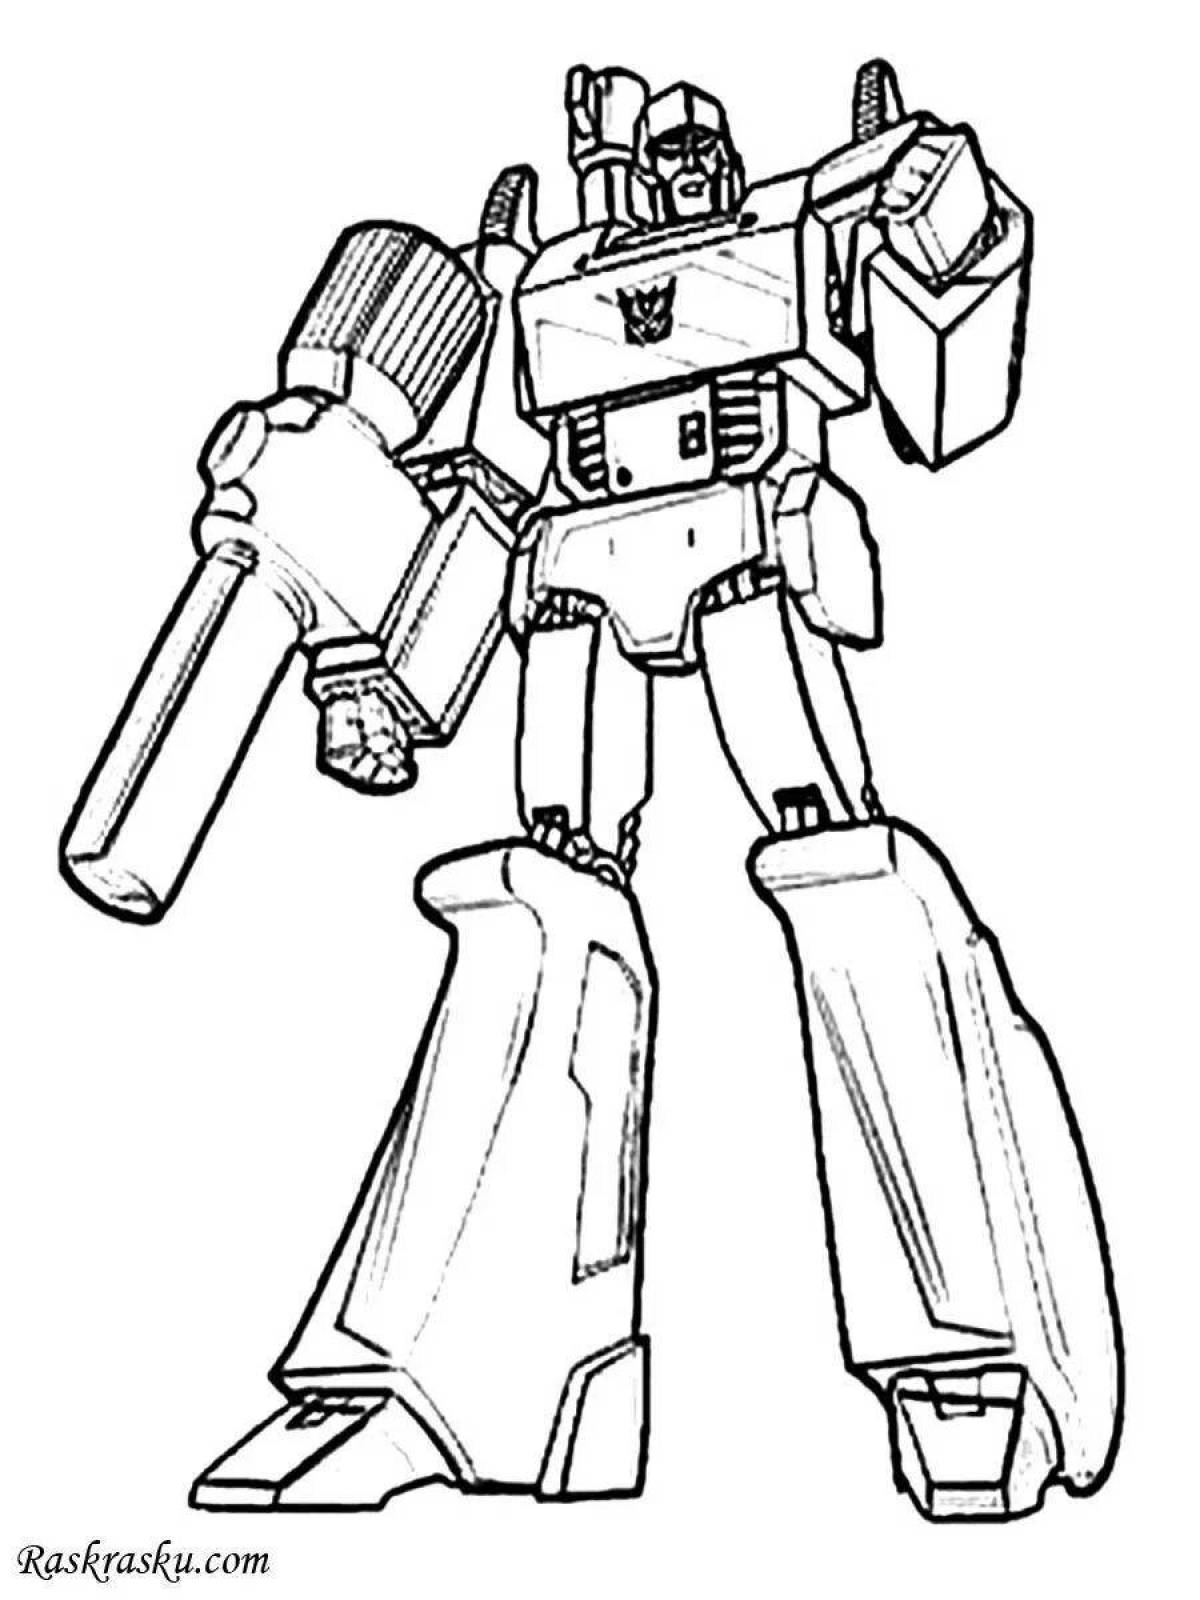 Fabulous Autobots coloring pages for kids